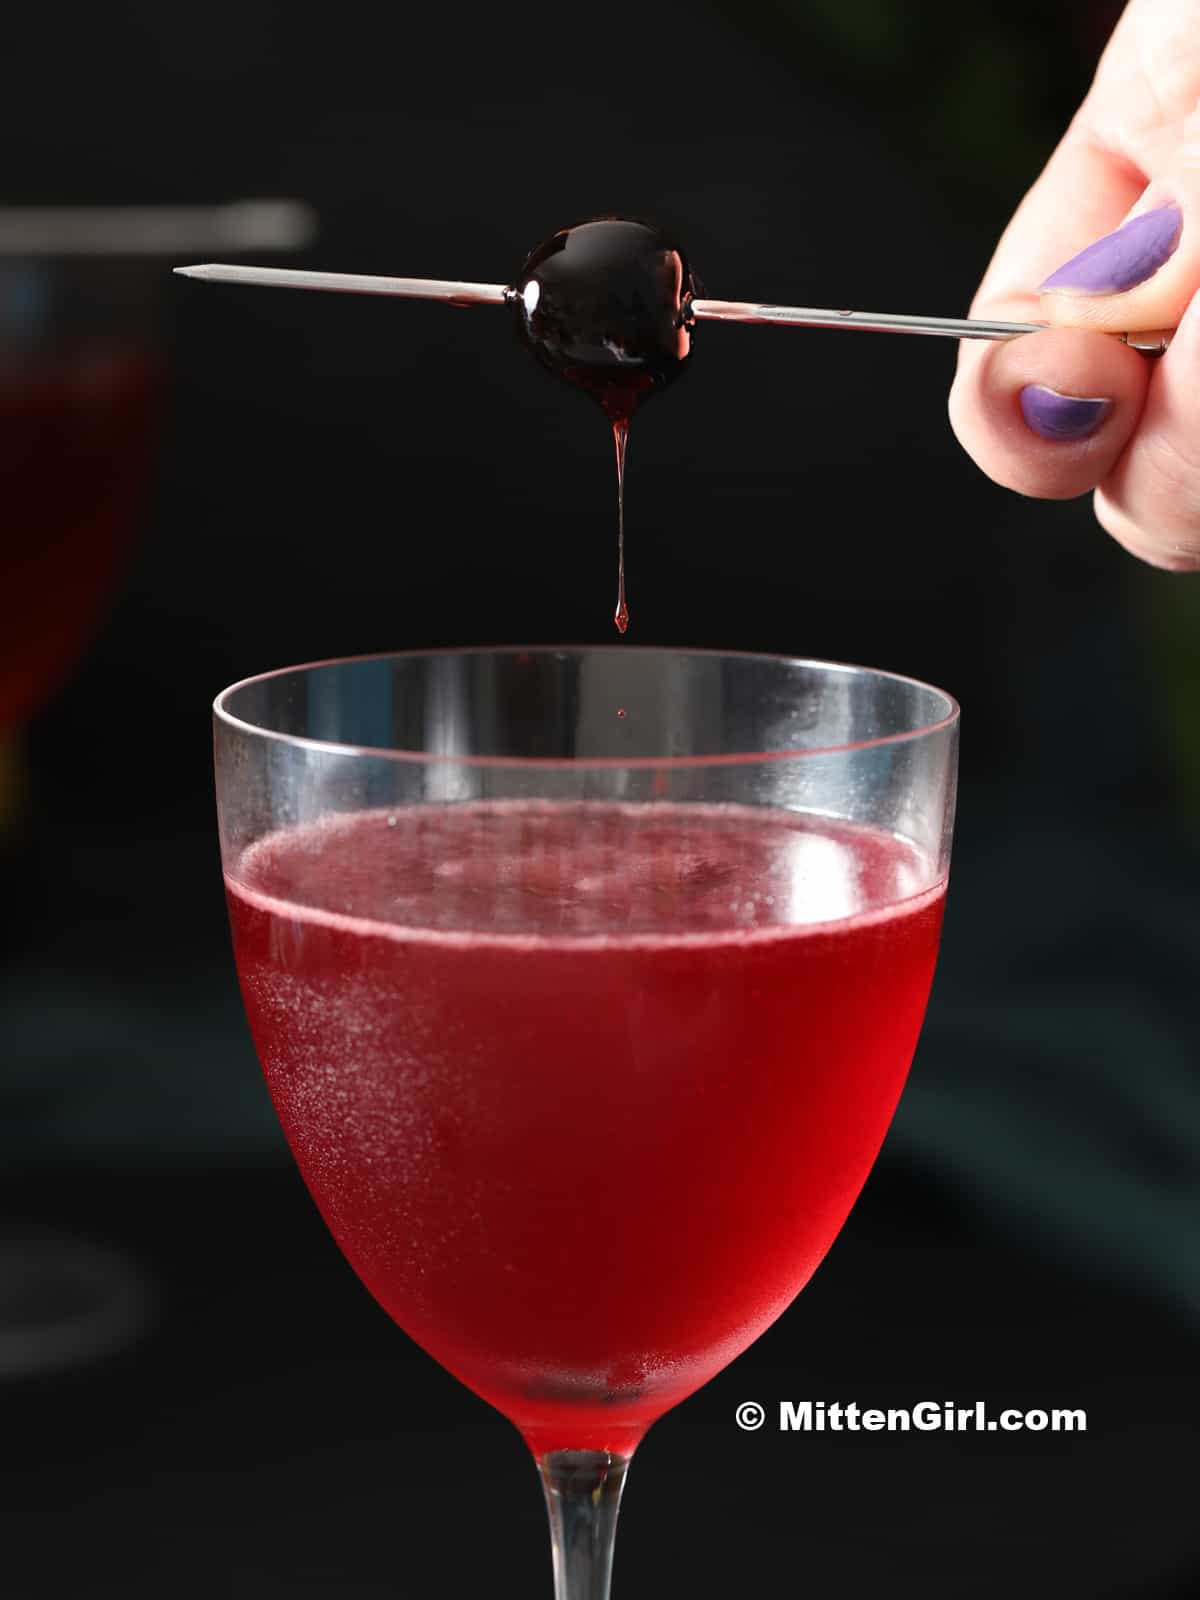 A cocktail pick with a maraschino cherry being set on top of a cocktail glass.